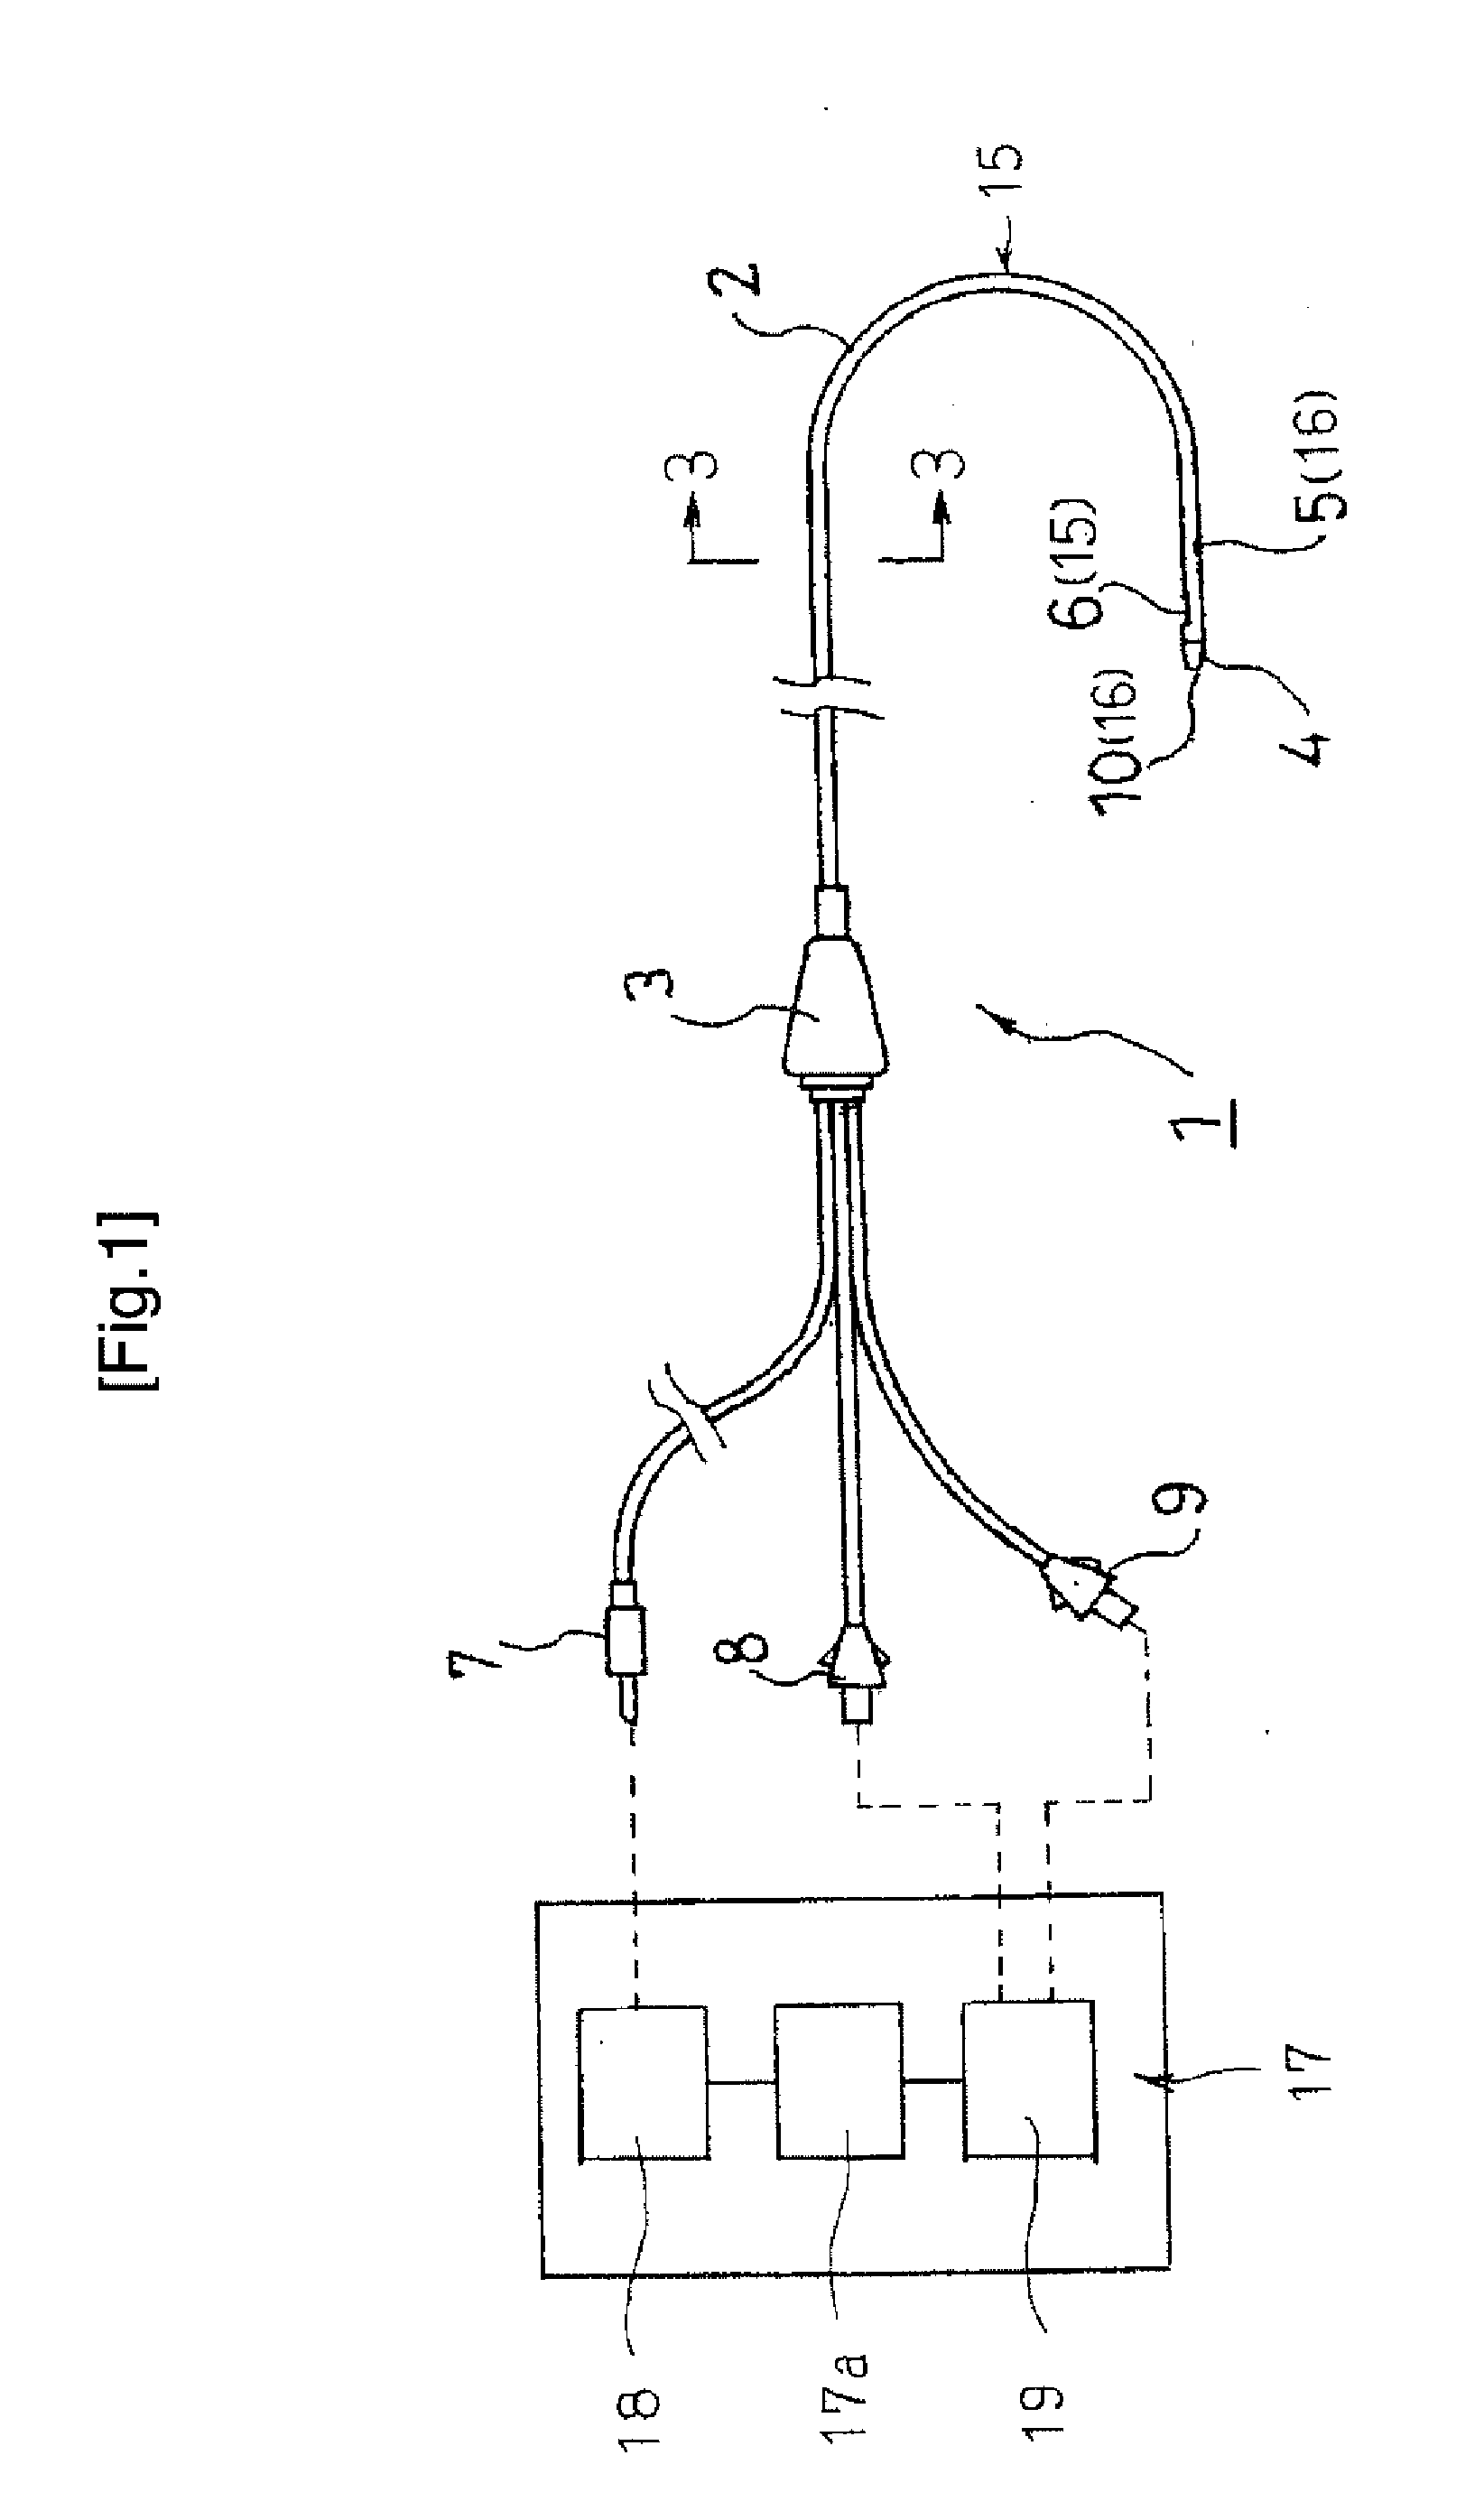 Device for diagnosing tissue injury